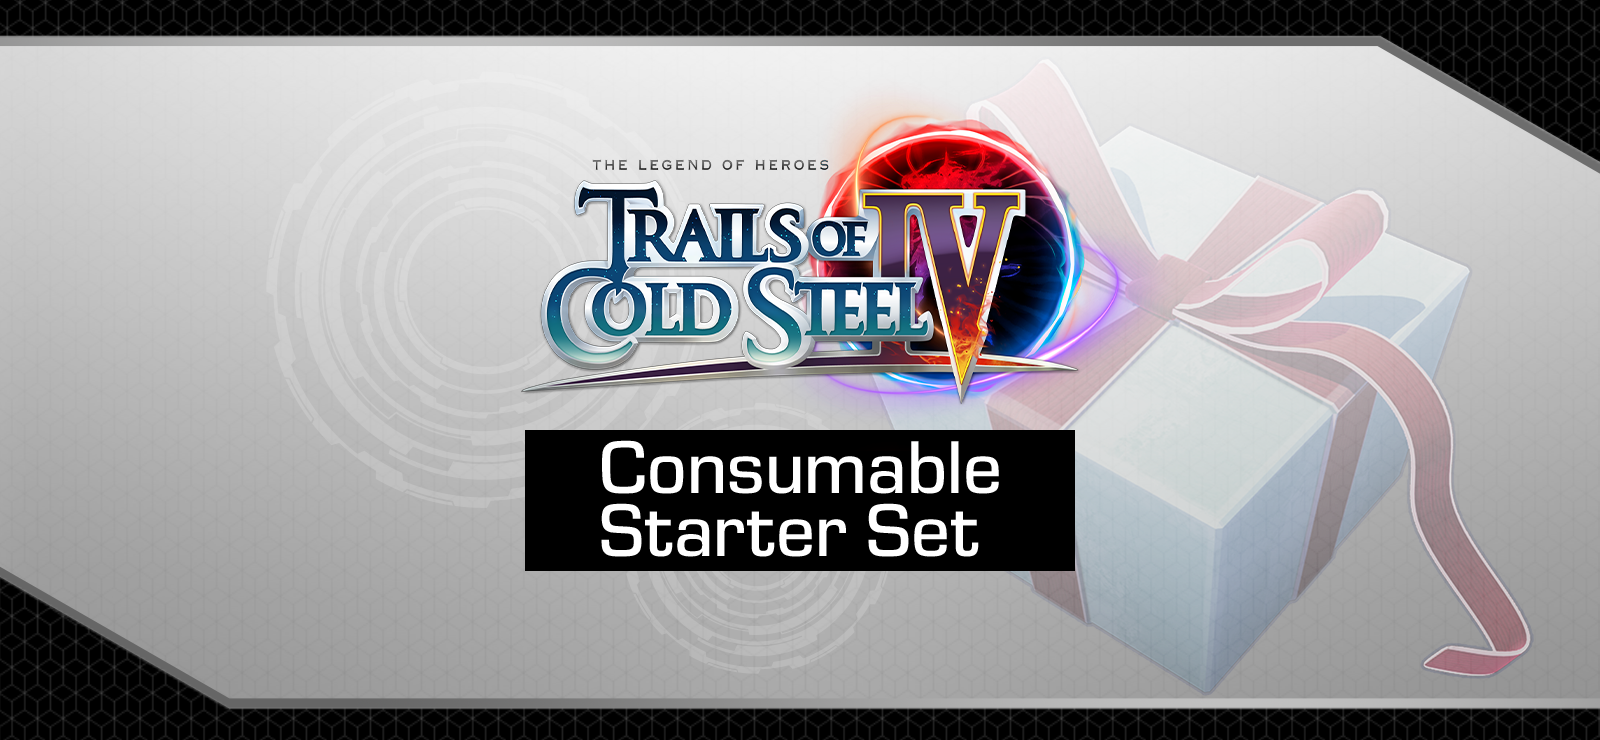 The Legend Of Heroes: Trails Of Cold Steel IV - Consumable Starter Set